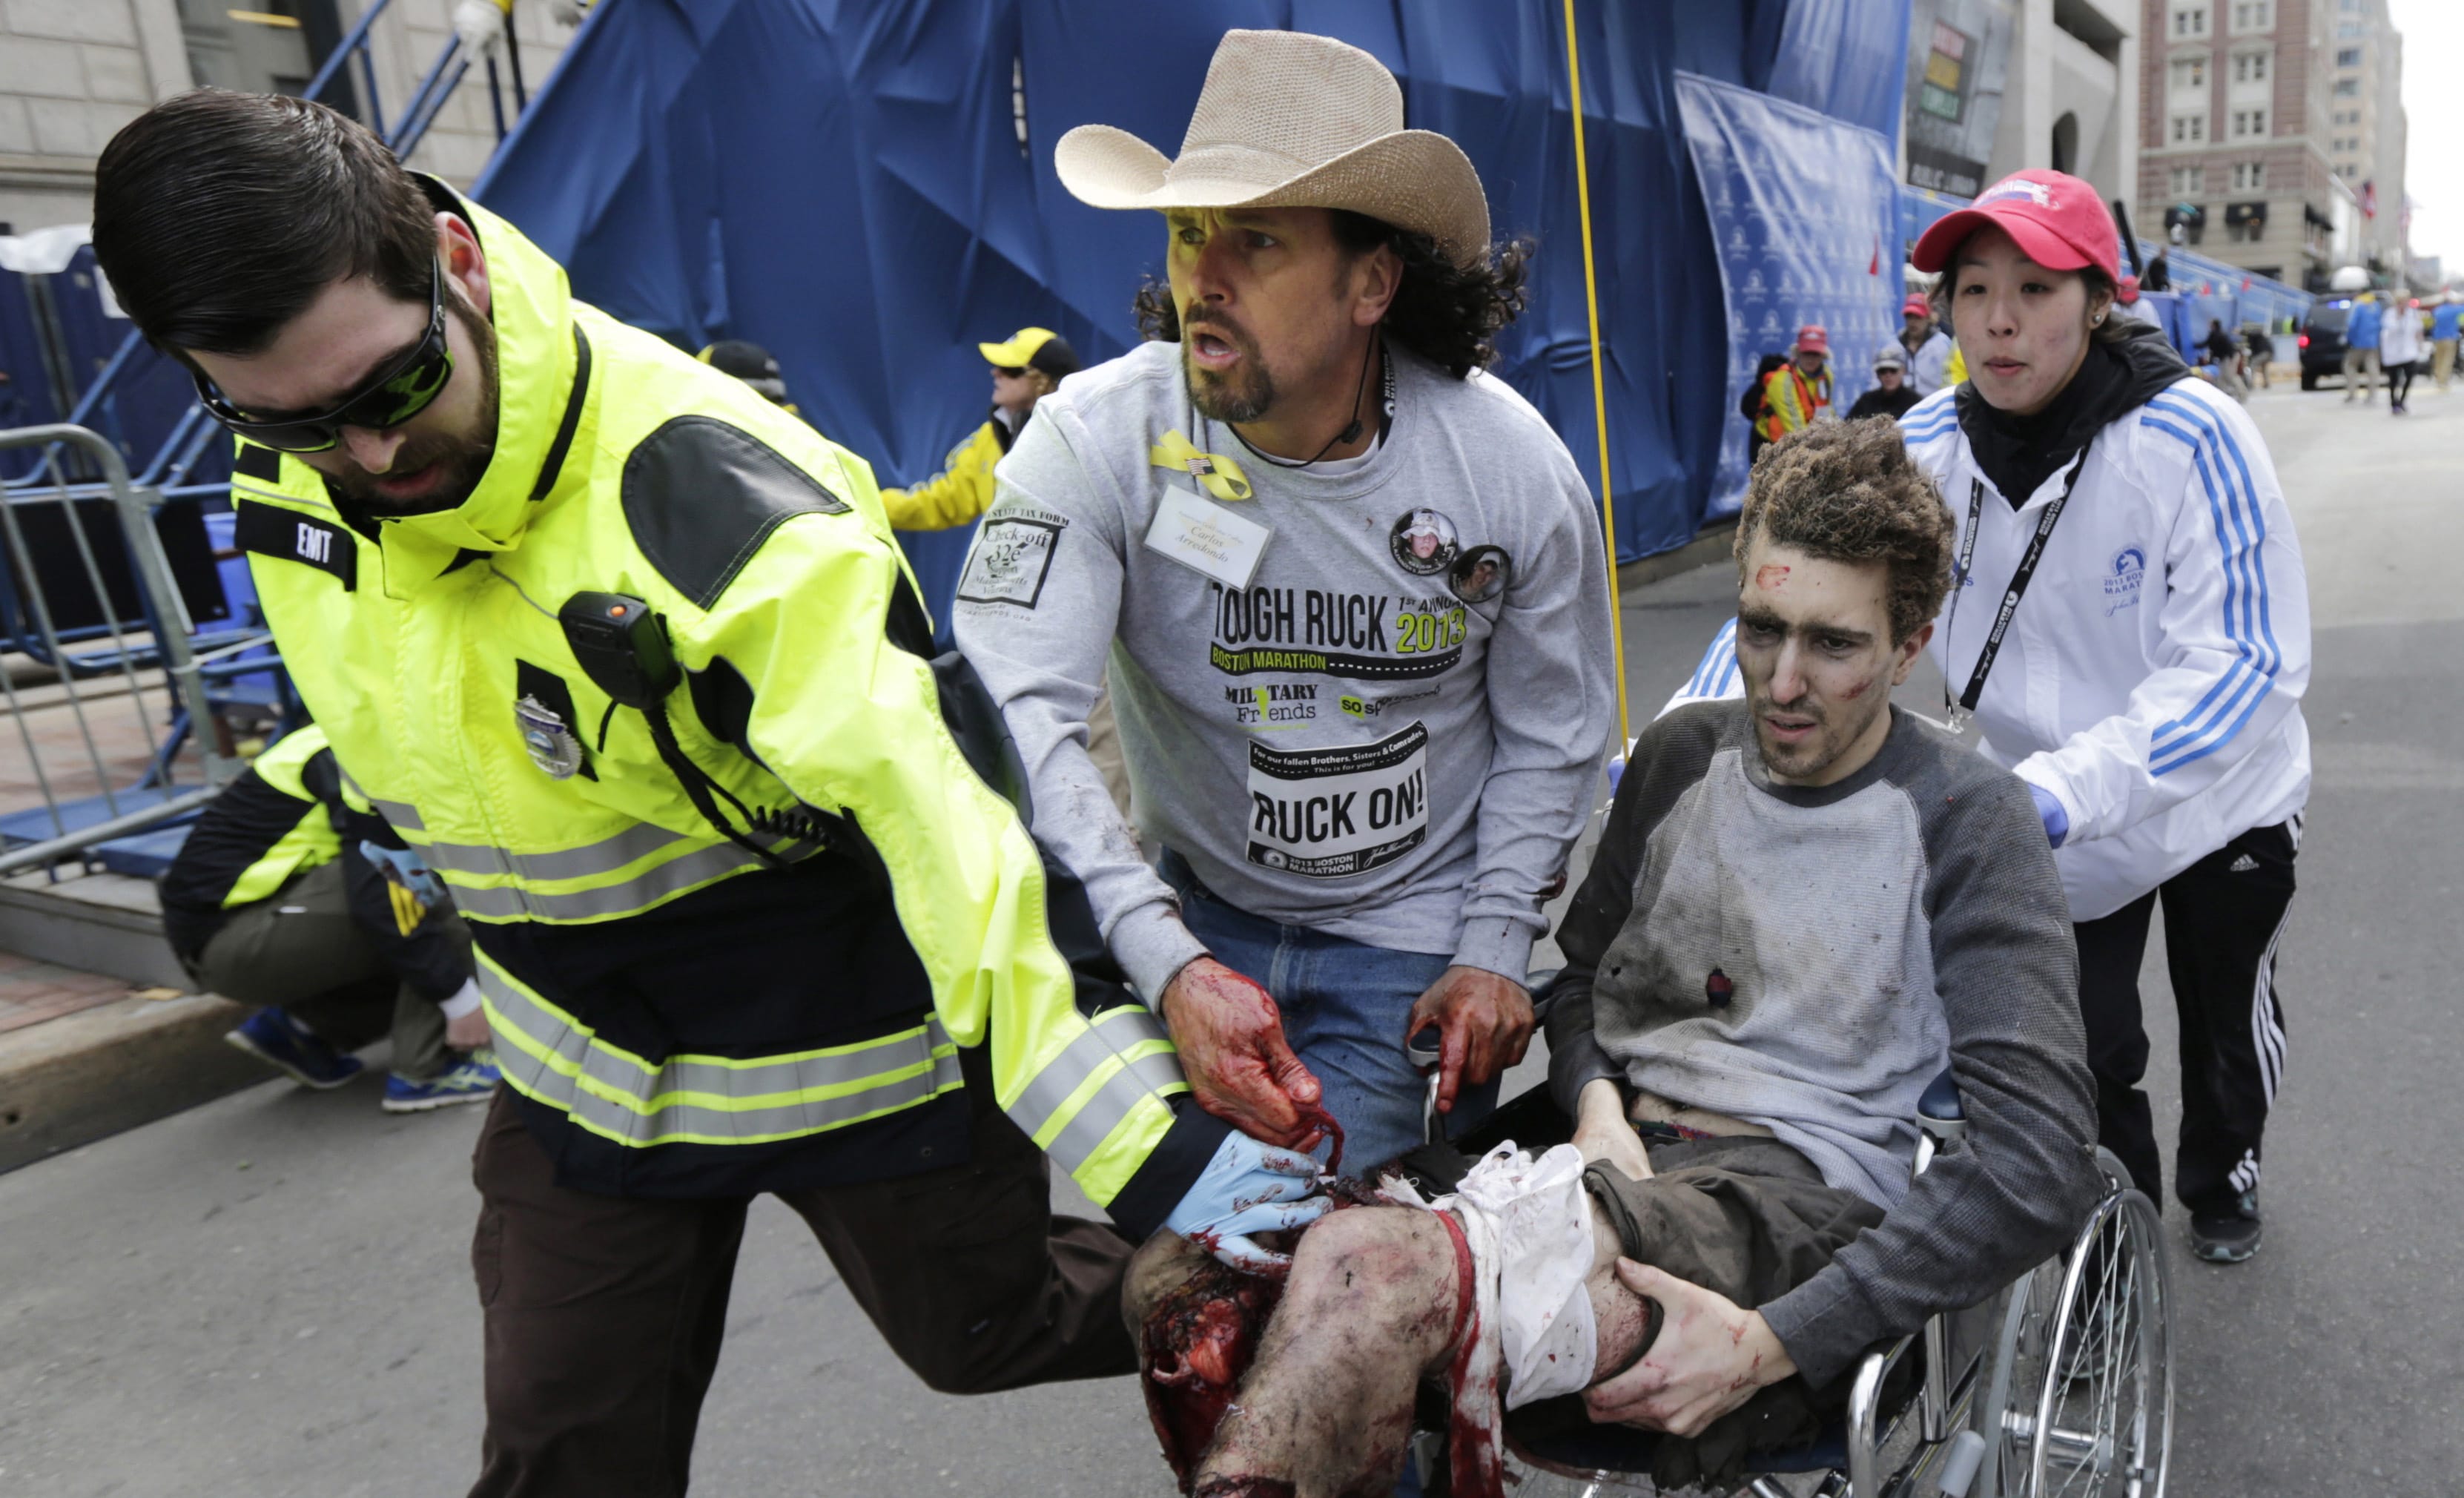 Boston EMT Paul Mitchell, left, bystander Carlos Arredondo, in cowboy hat, and Boston University student Devin Wang push Jeff Bauman in a wheelchair after he was injured in last year's Boston Marathon bombing.